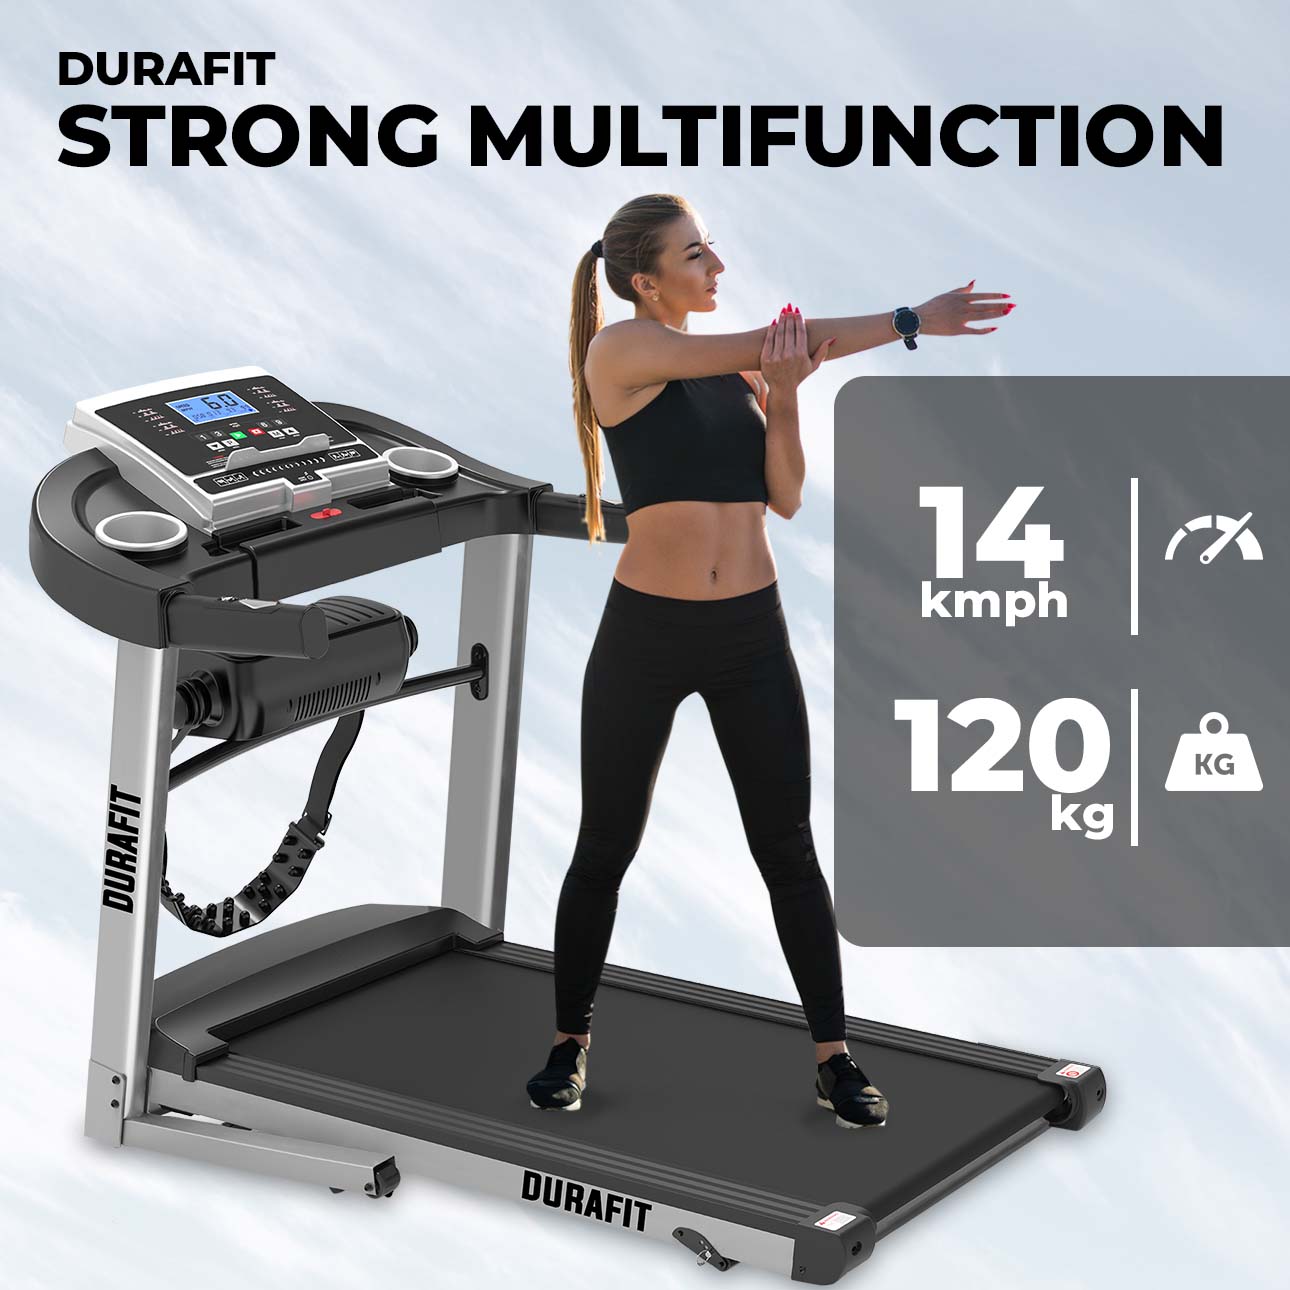 Durafit Strong Multifunction Treadmill with 14kmph 